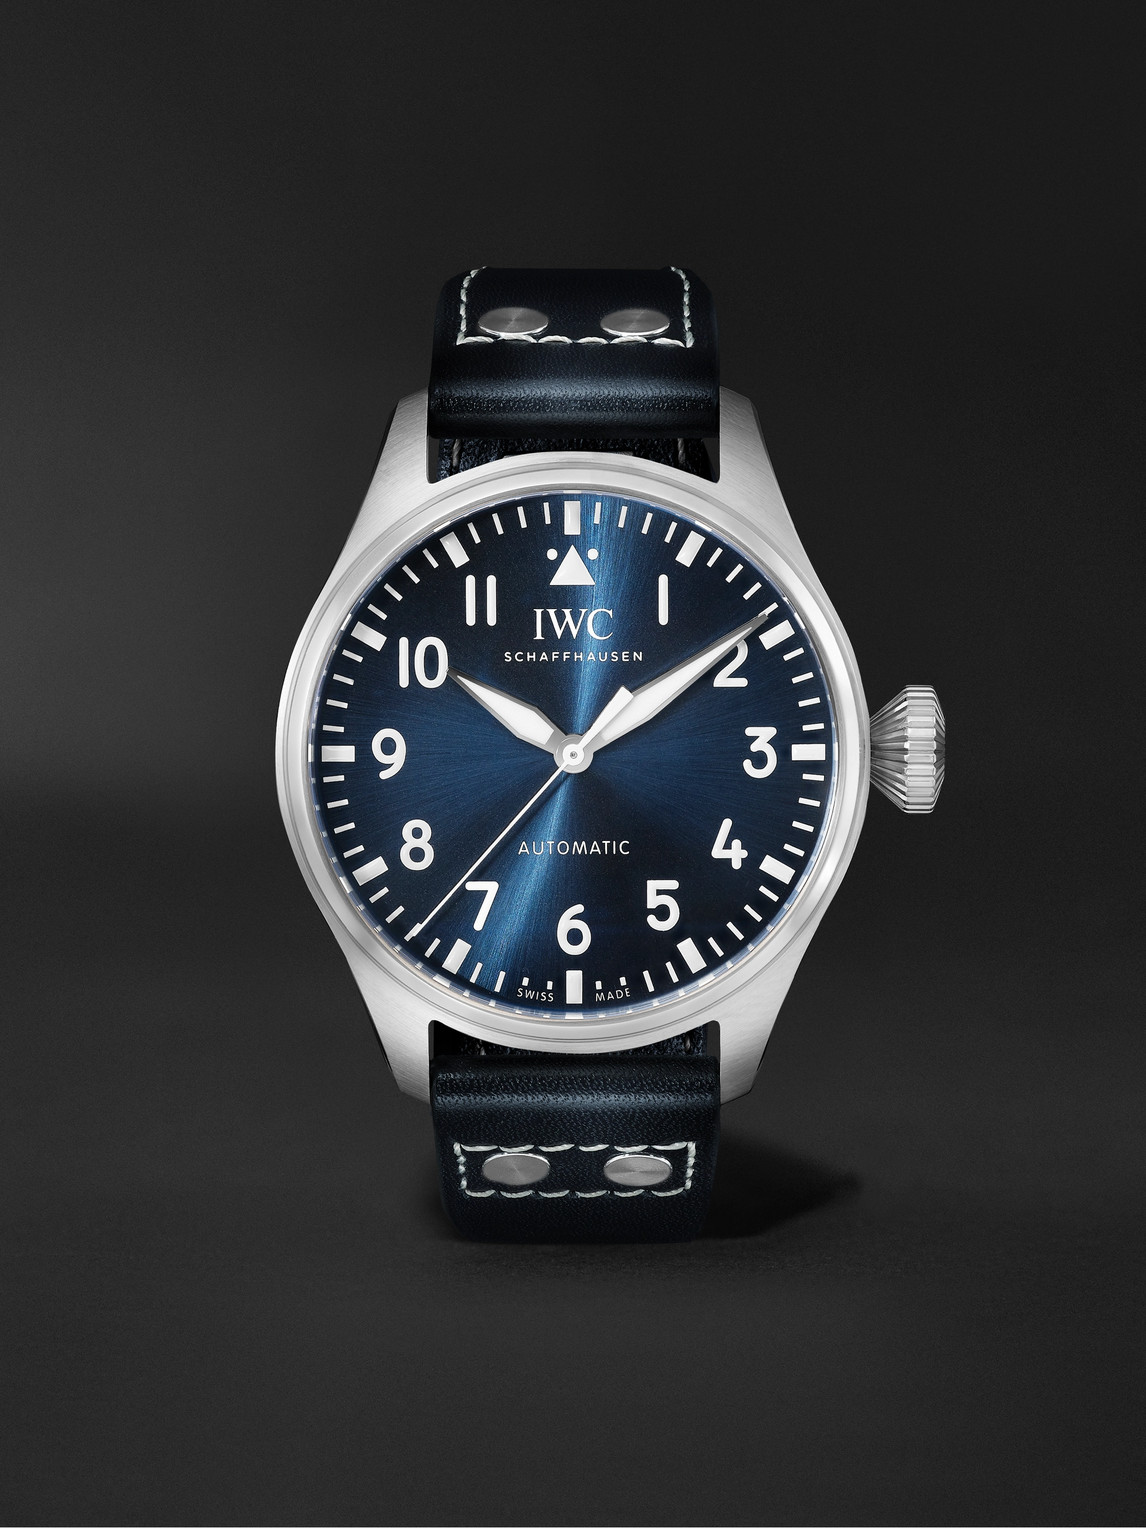 Iwc Schaffhausen Big Pilot's Automatic 43mm Stainless Steel And Leather Watch, Ref. No. Iw329303 In Blue